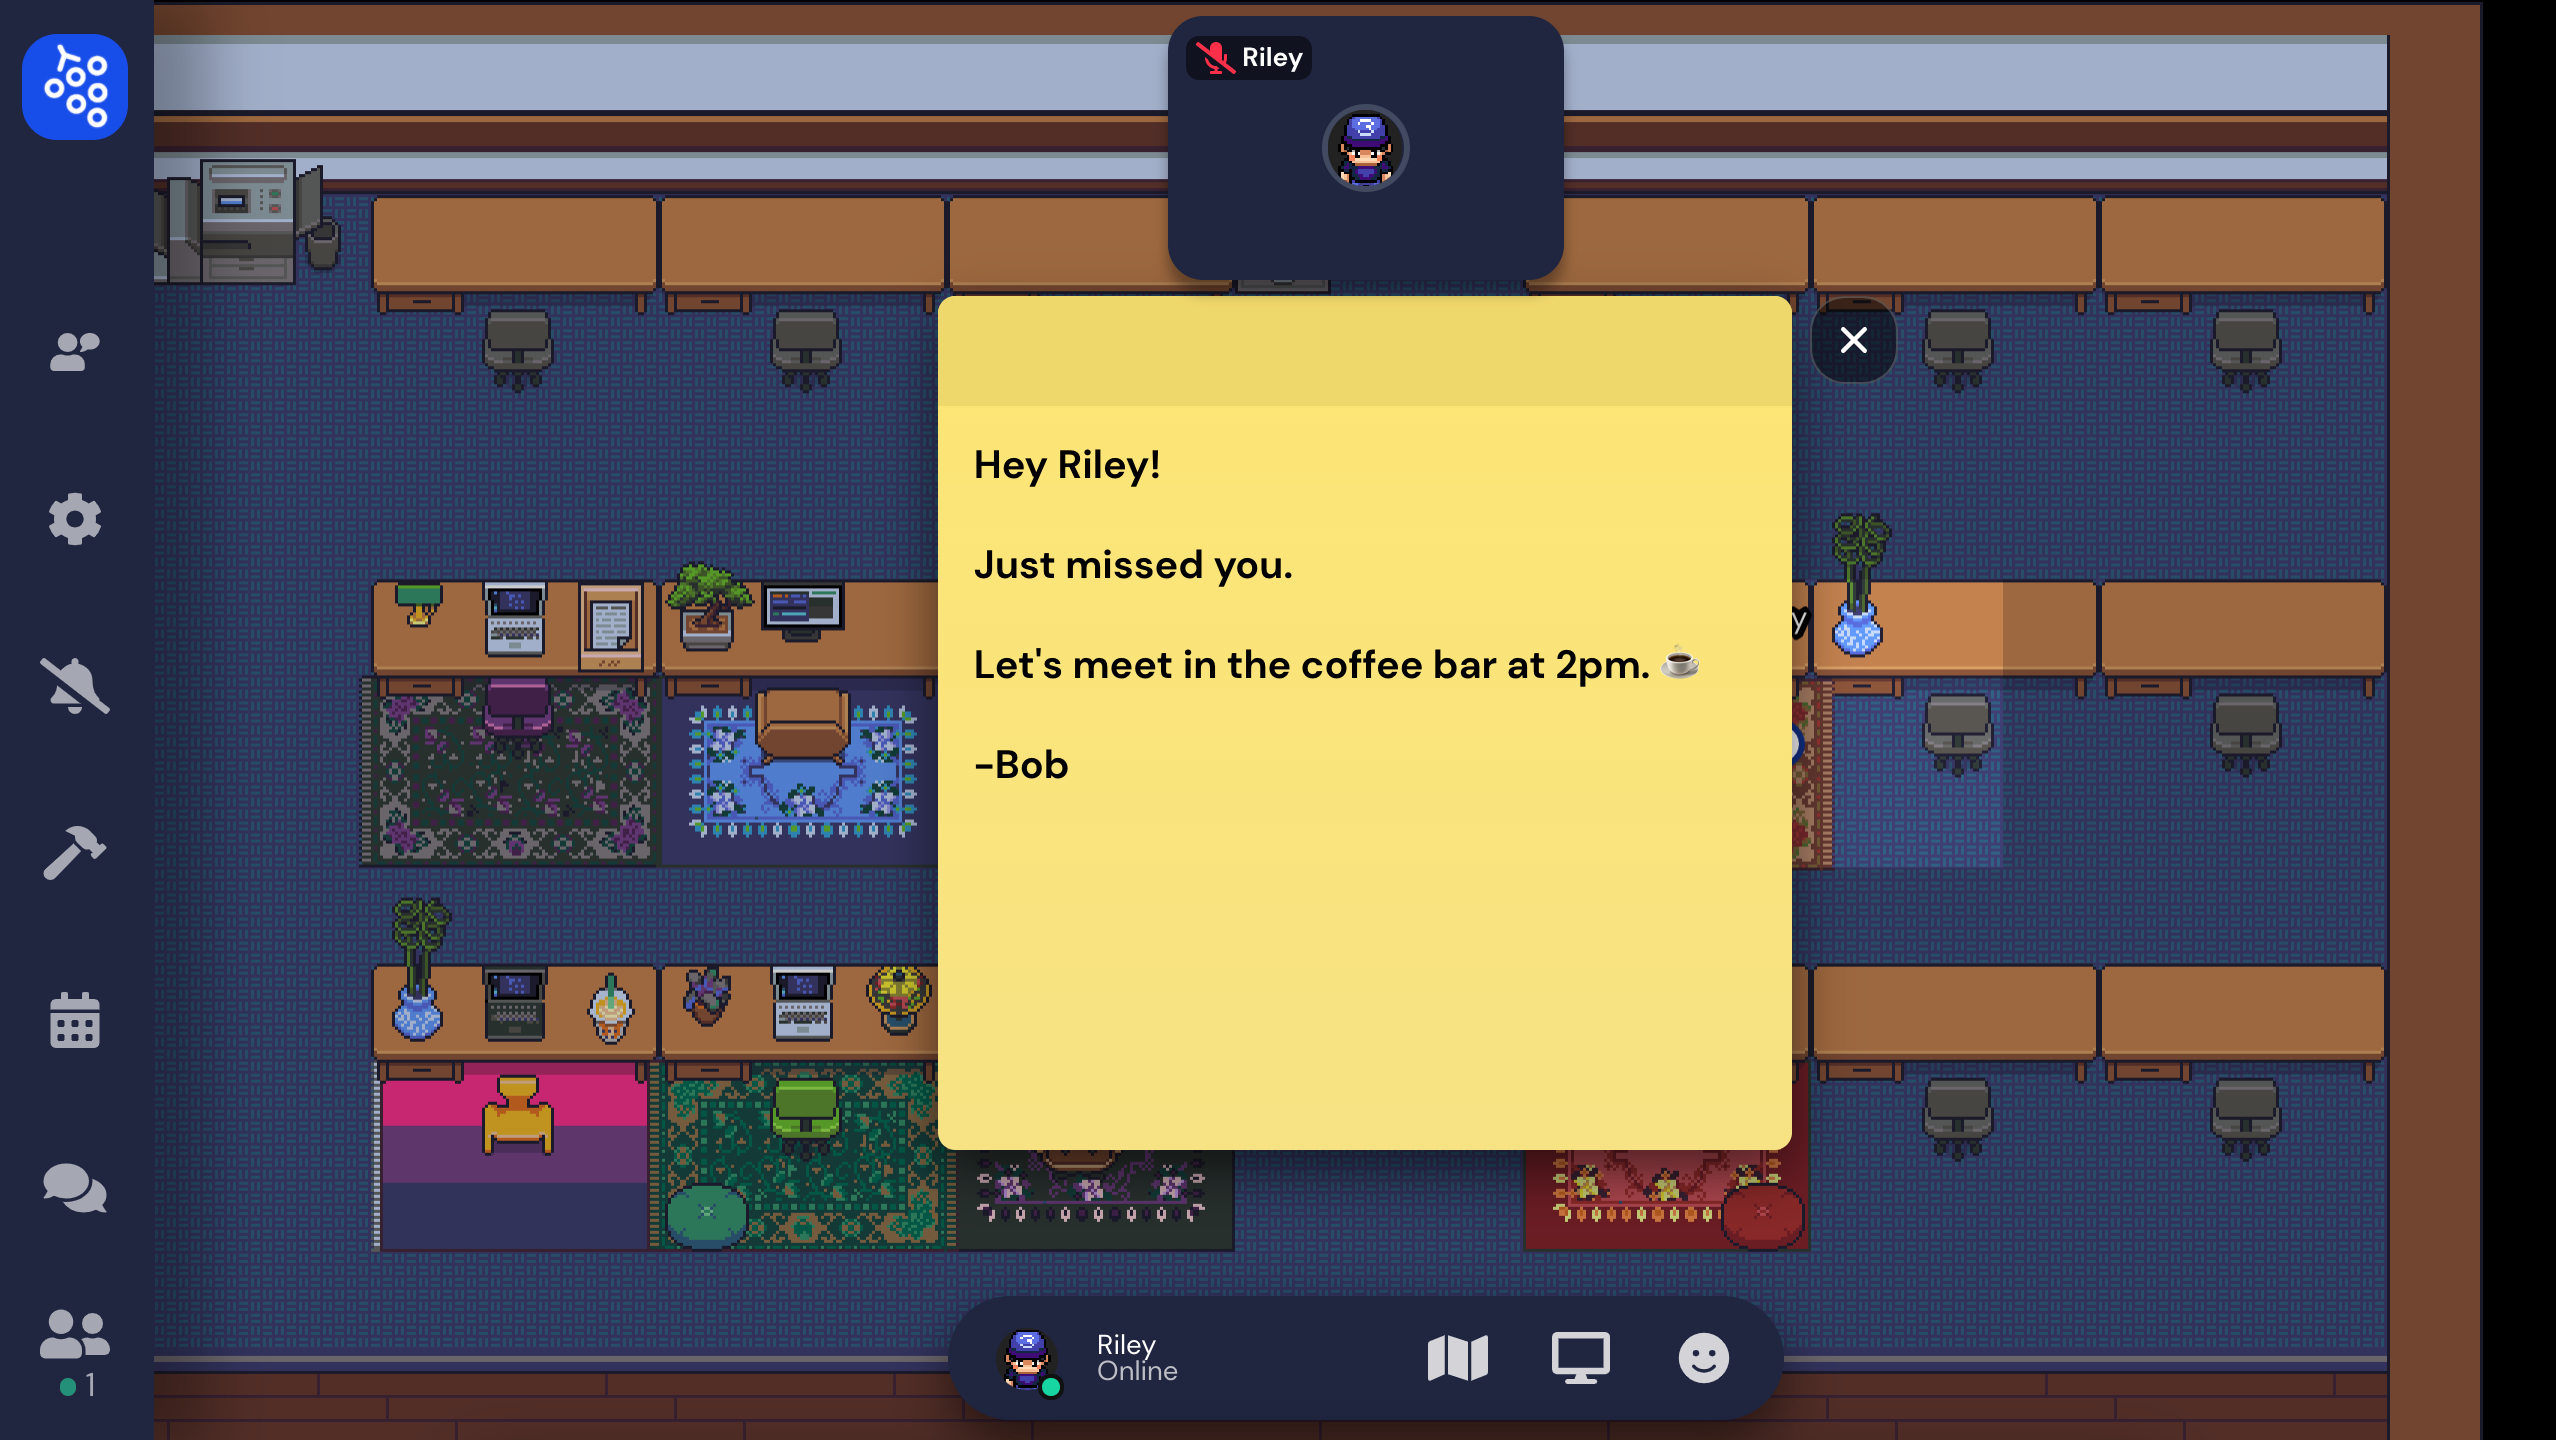 A screenshot of the desk area in the Office Complex. The center of the screen shows a large yellow sticky note with the message "Hey Riley! Just missed you. Let's meet in the coffee bar at 2 pm. -Bob" There is a coffee cup emoji after "2 pm." An x displays at the top right of the note to close it. 